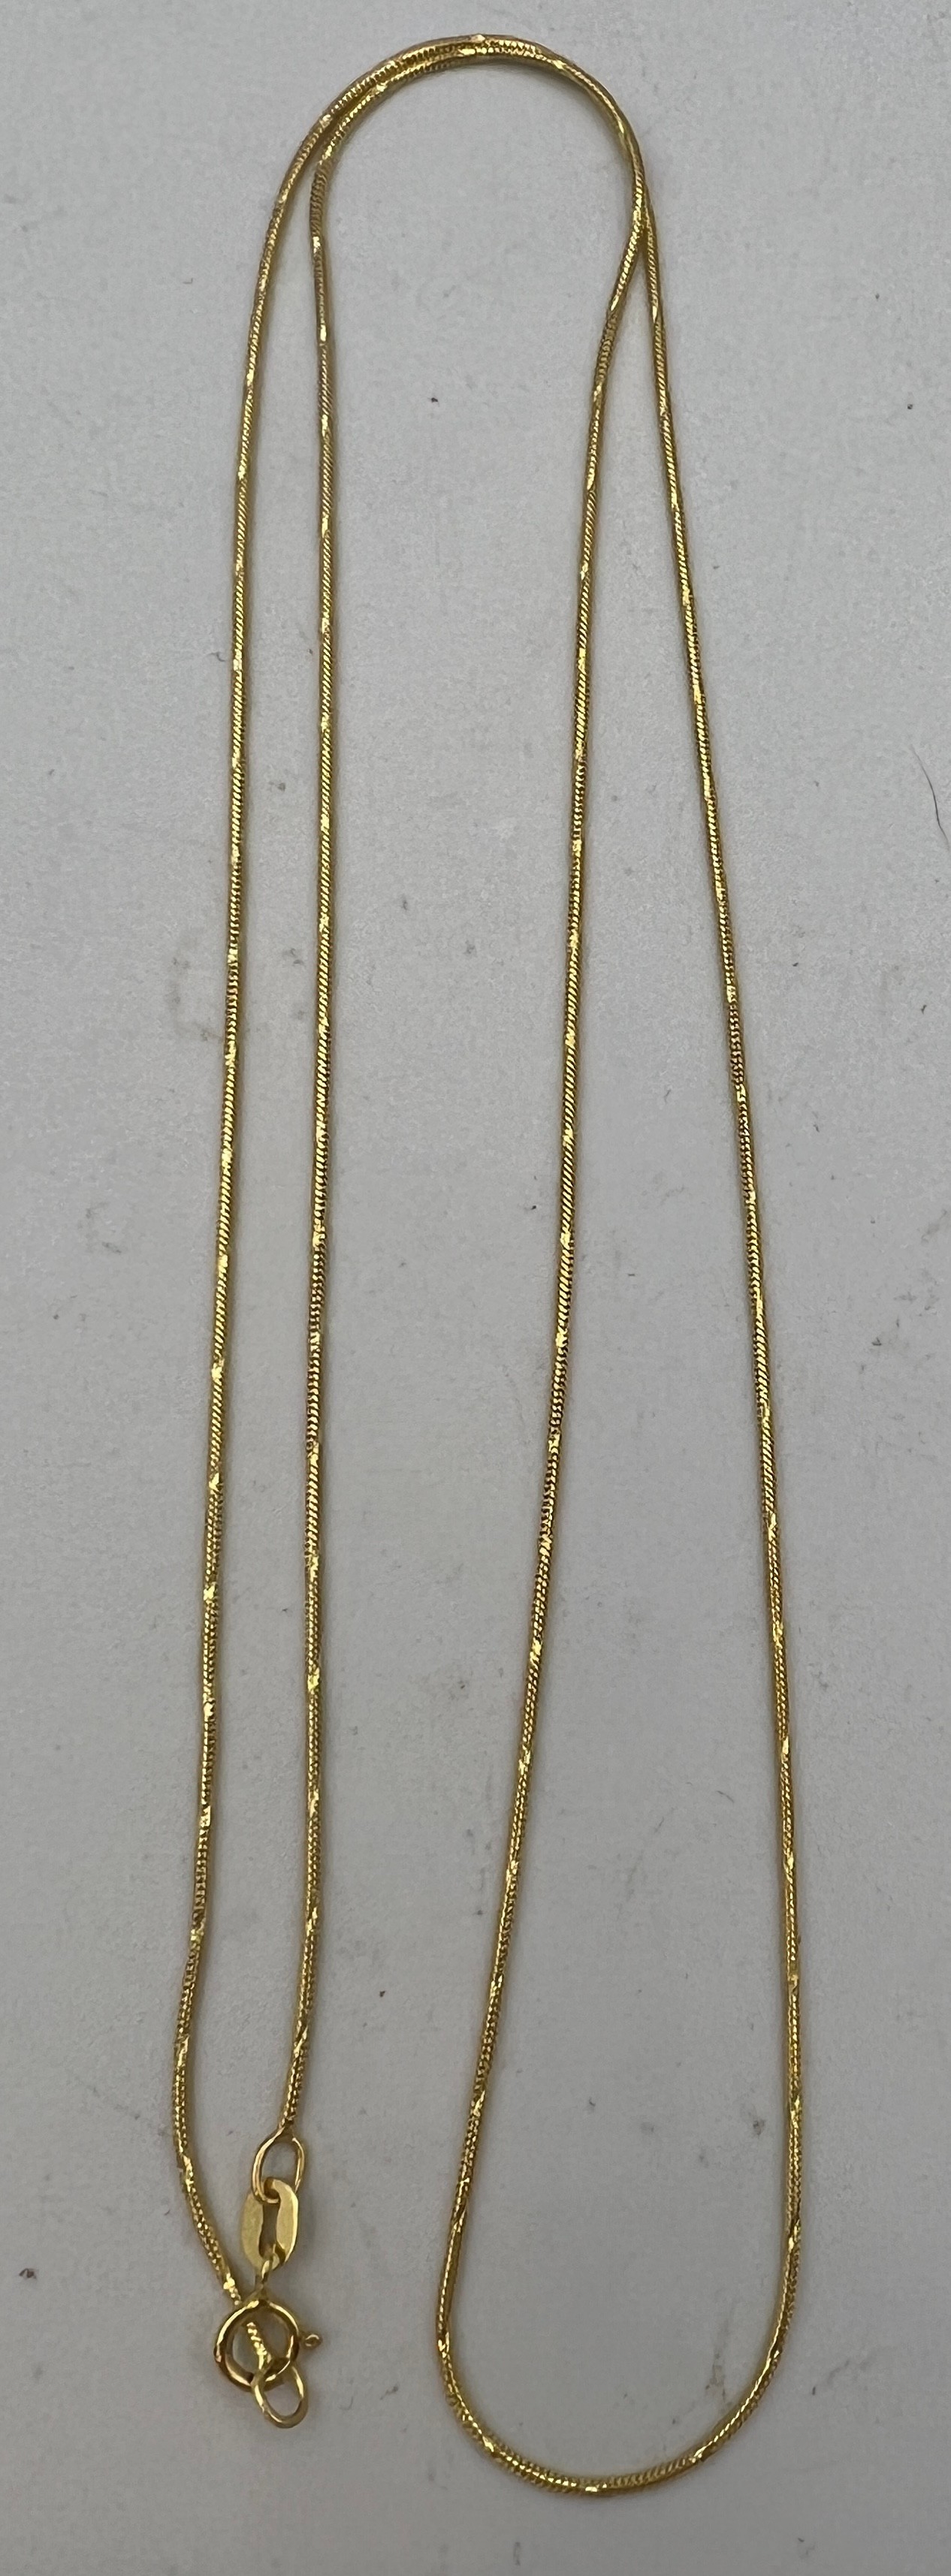 A fine gold chain necklace marked .585 (14 carat gold) Length 54cm. Weight 3.3gm.